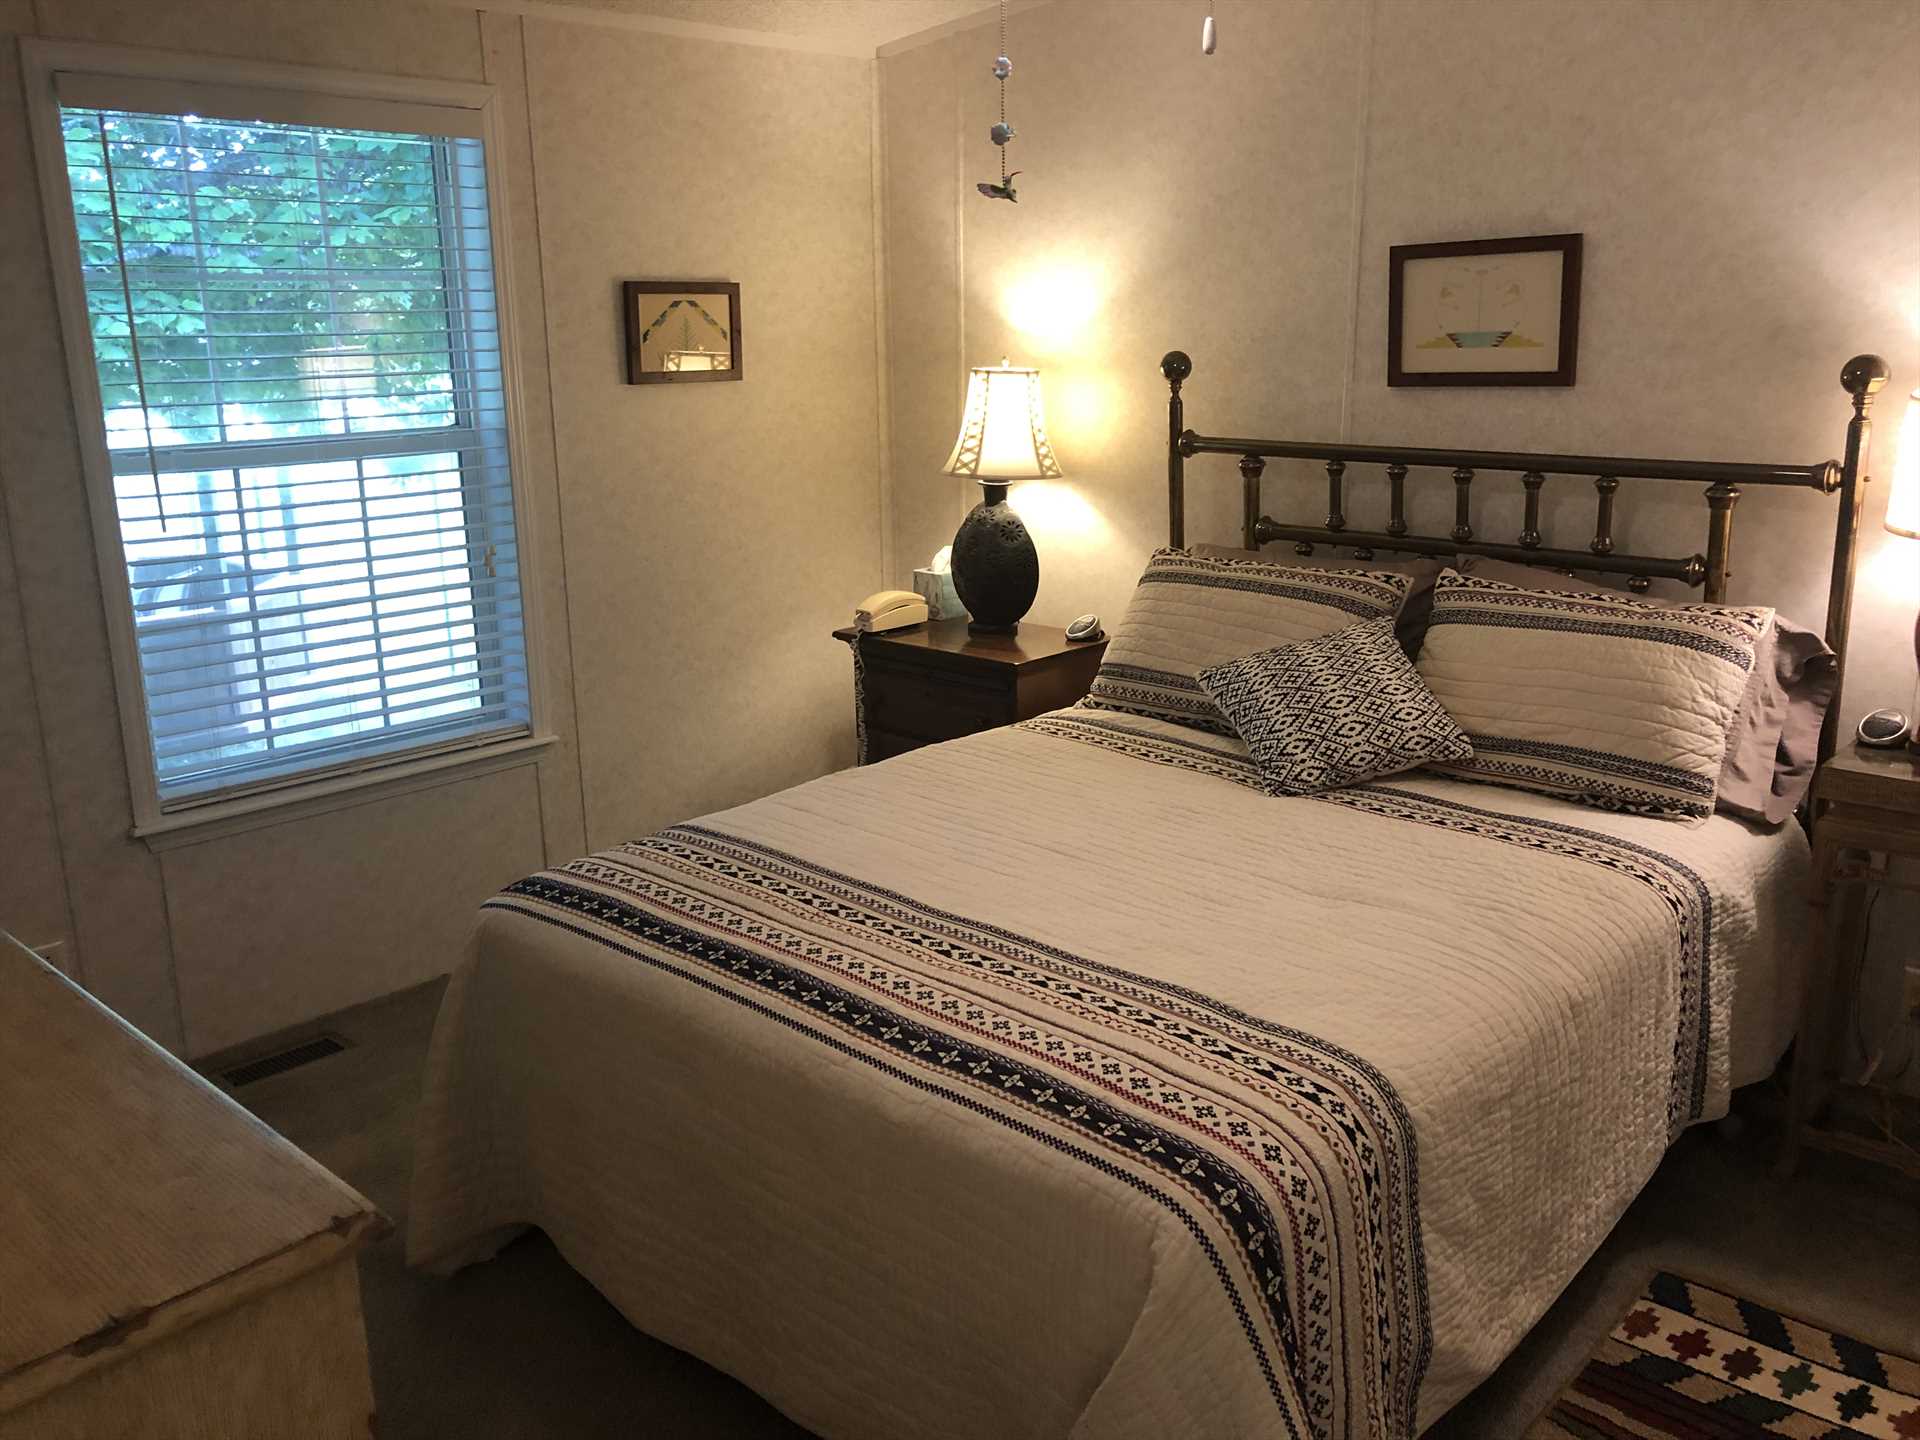                                                 Light decor and a ceiling fan keep the queen-sized bed in the second bedroom airy and comfy! Every inch of the house is climate-controlled with central air, too.